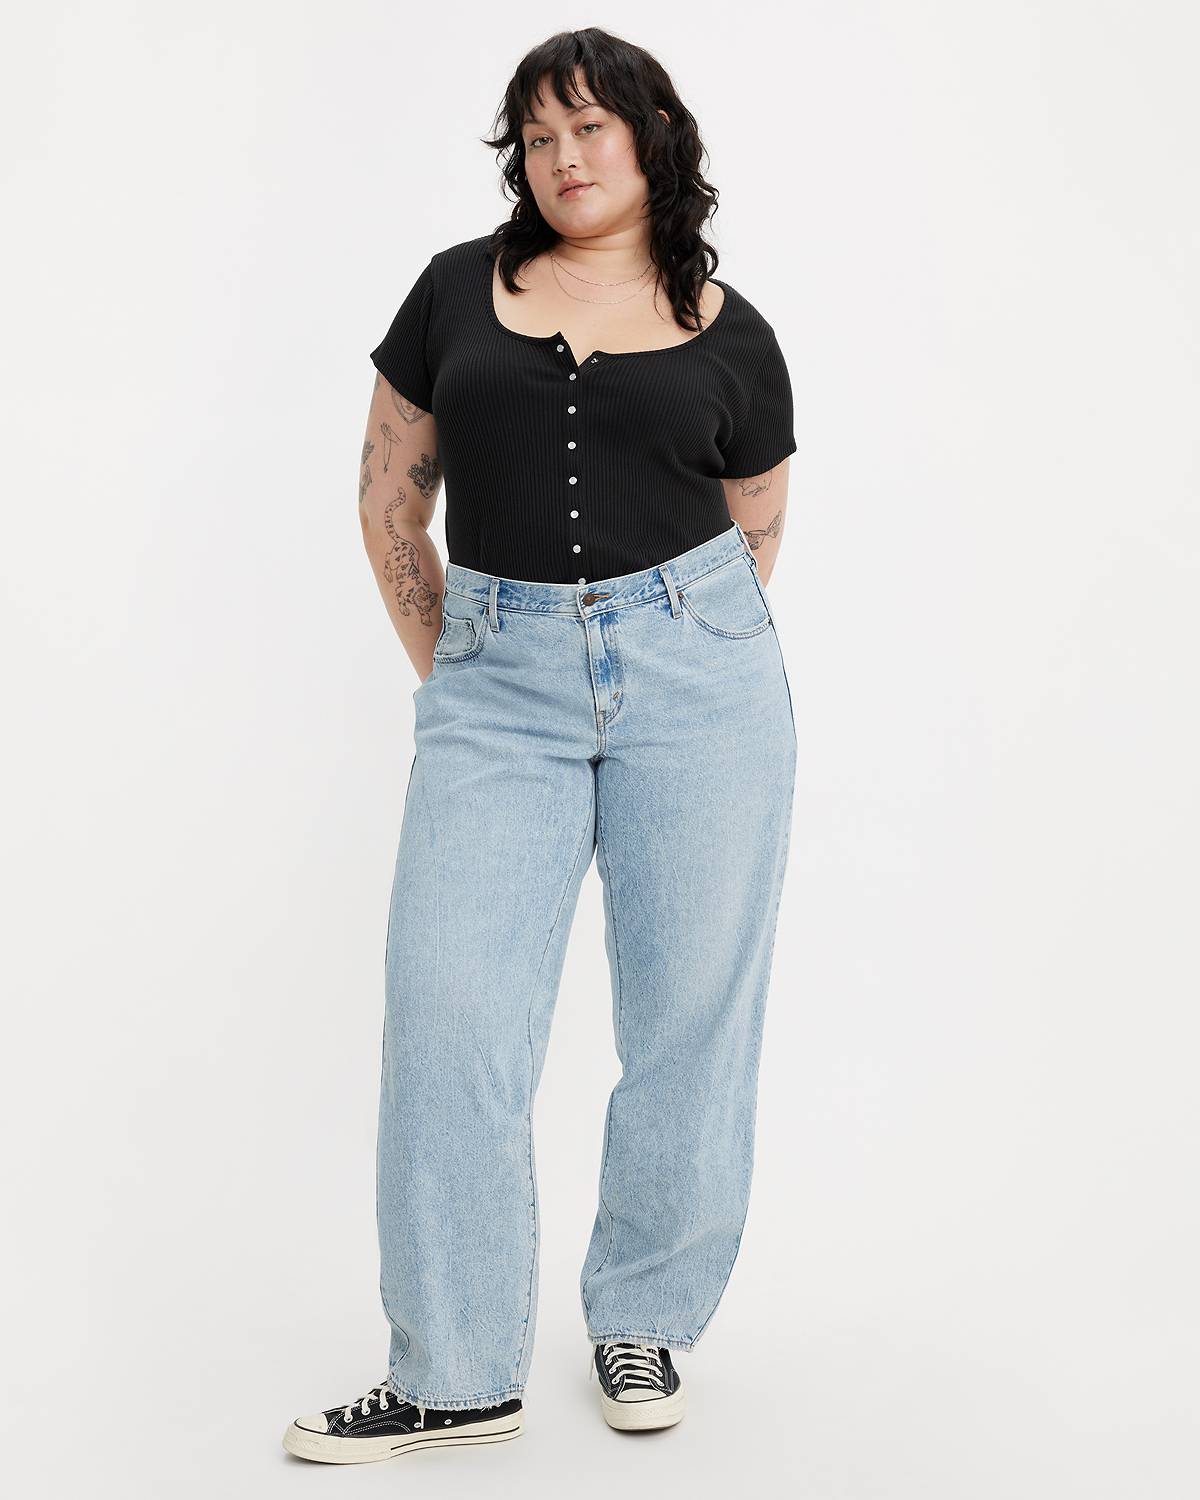 All The Levi's Tried & Compared: 501s, Wedgie Fit, Ribcage & 700